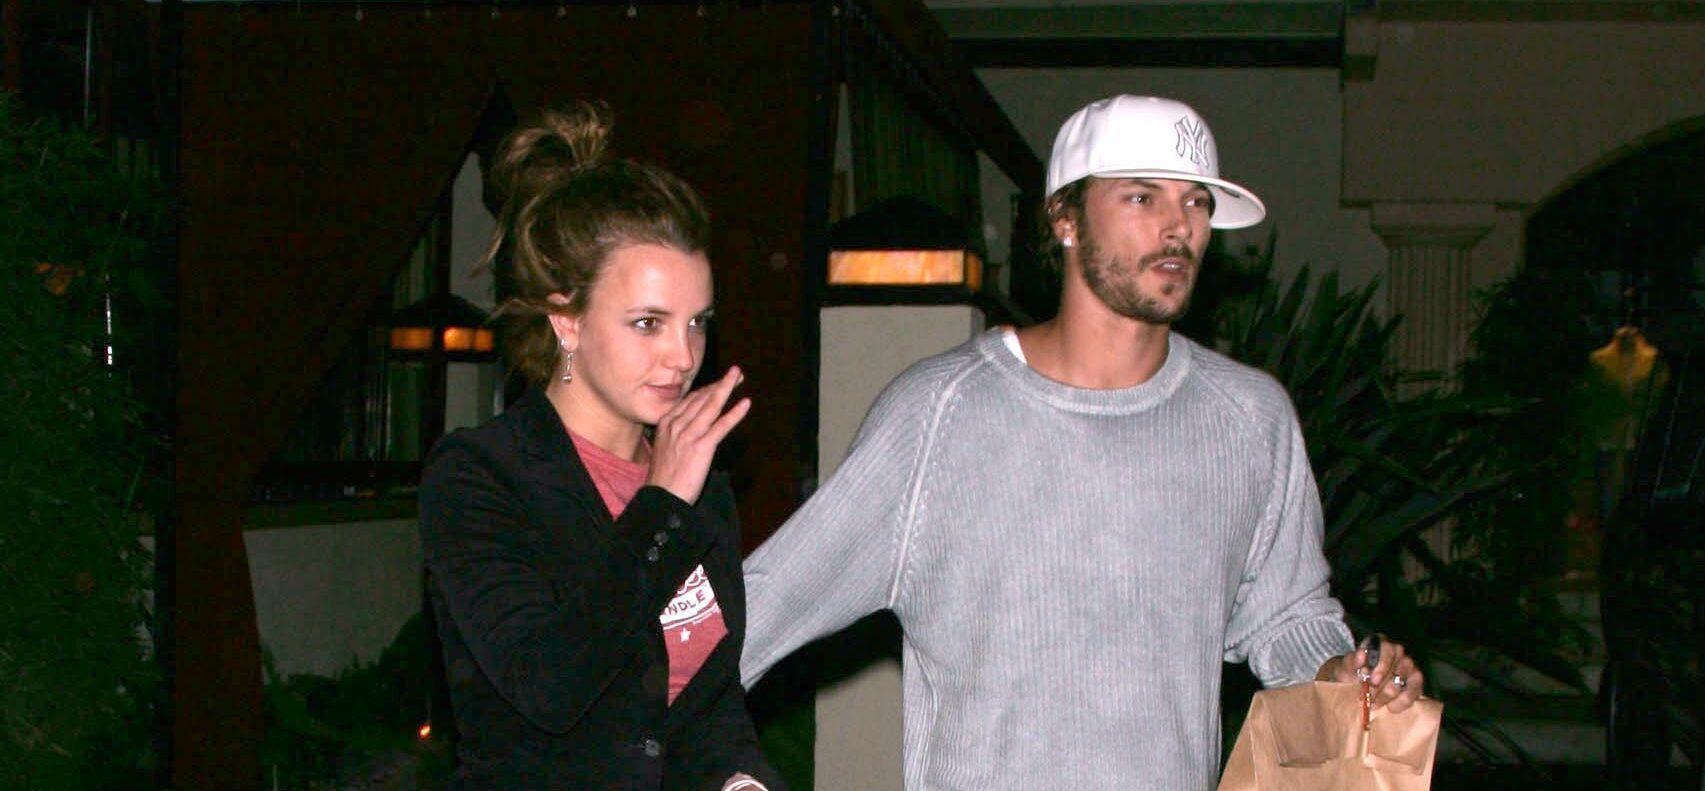 Britney Spears Claims She Had ‘No Idea’ Kevin Federline Had Children When They Dated